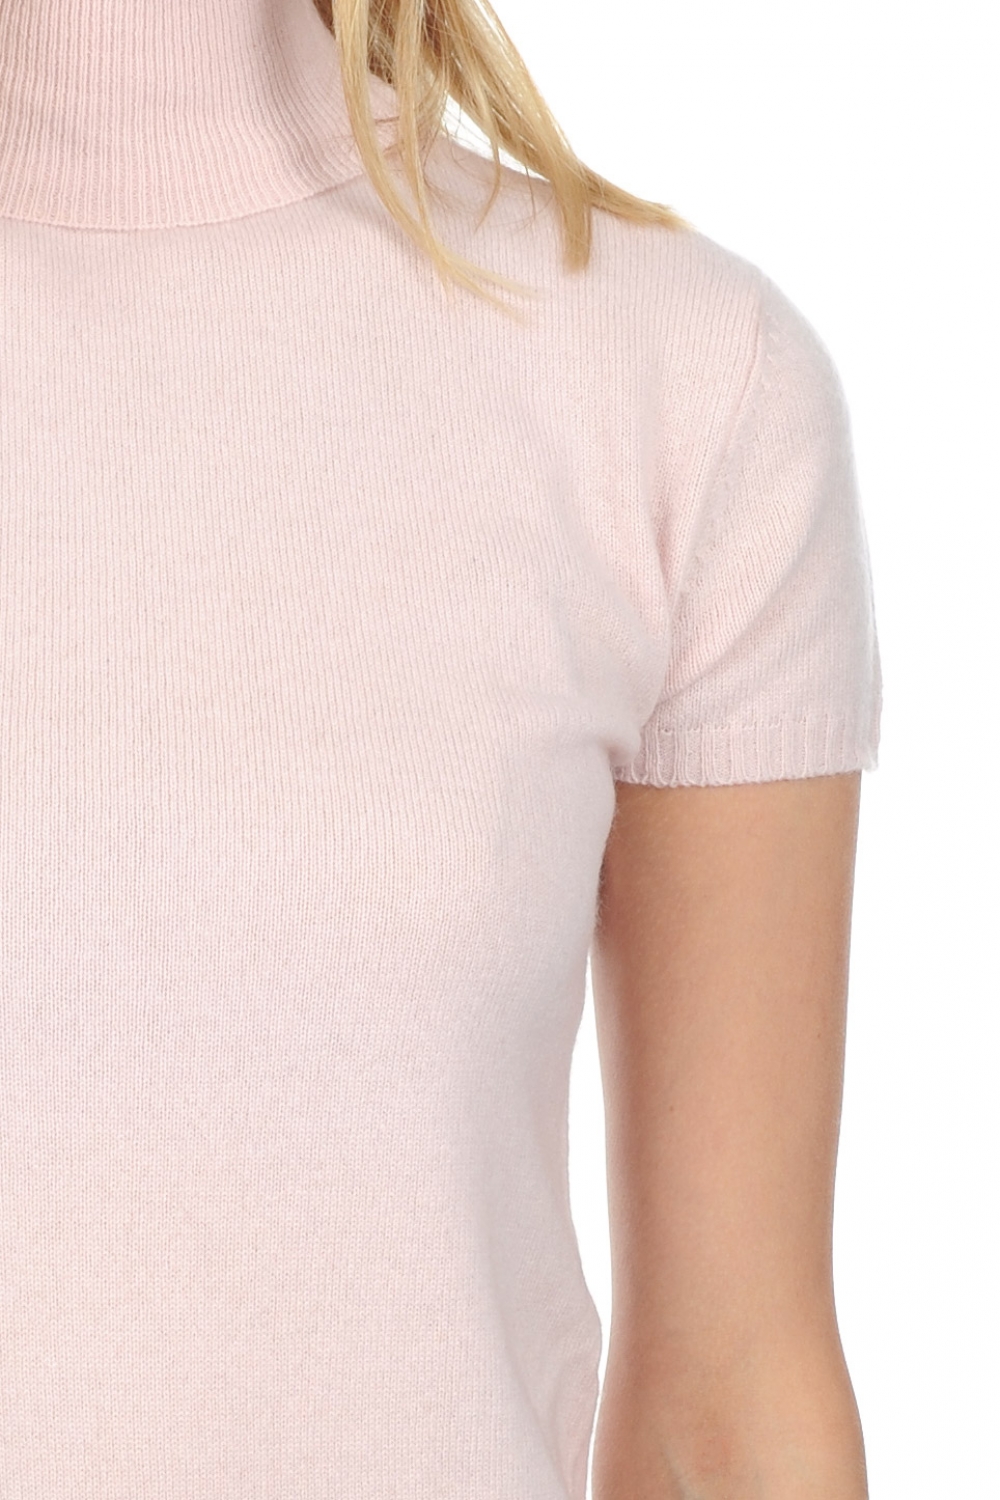 Cachemire pull femme col roule olivia rose pale m